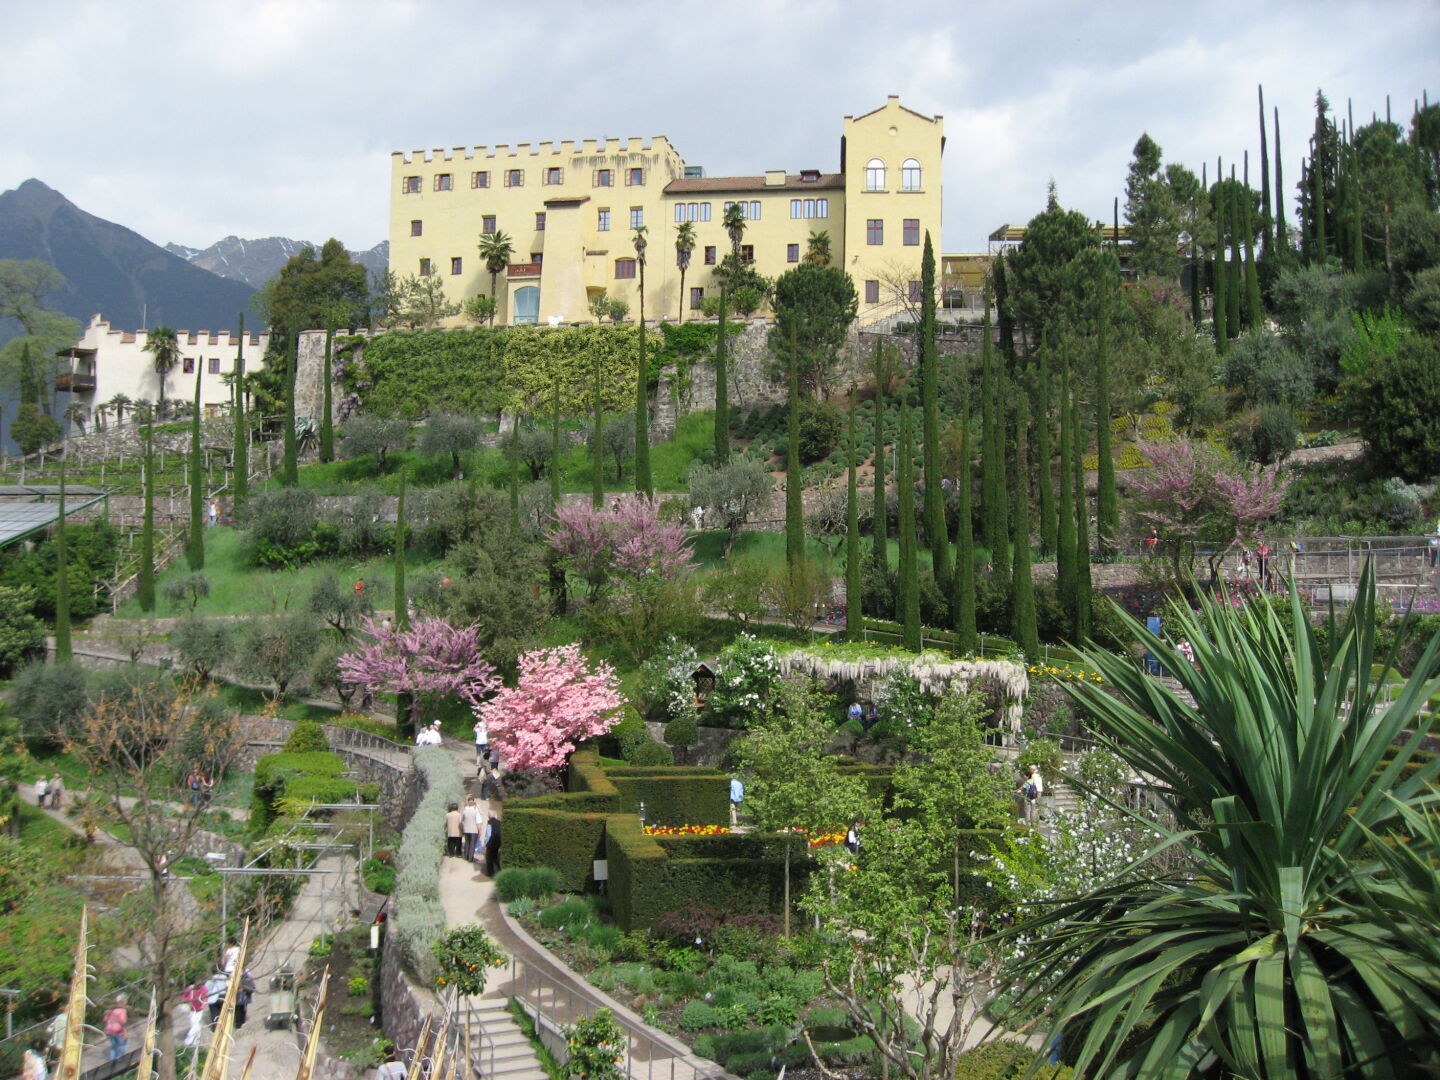 A view of the castle and part of the gardens.